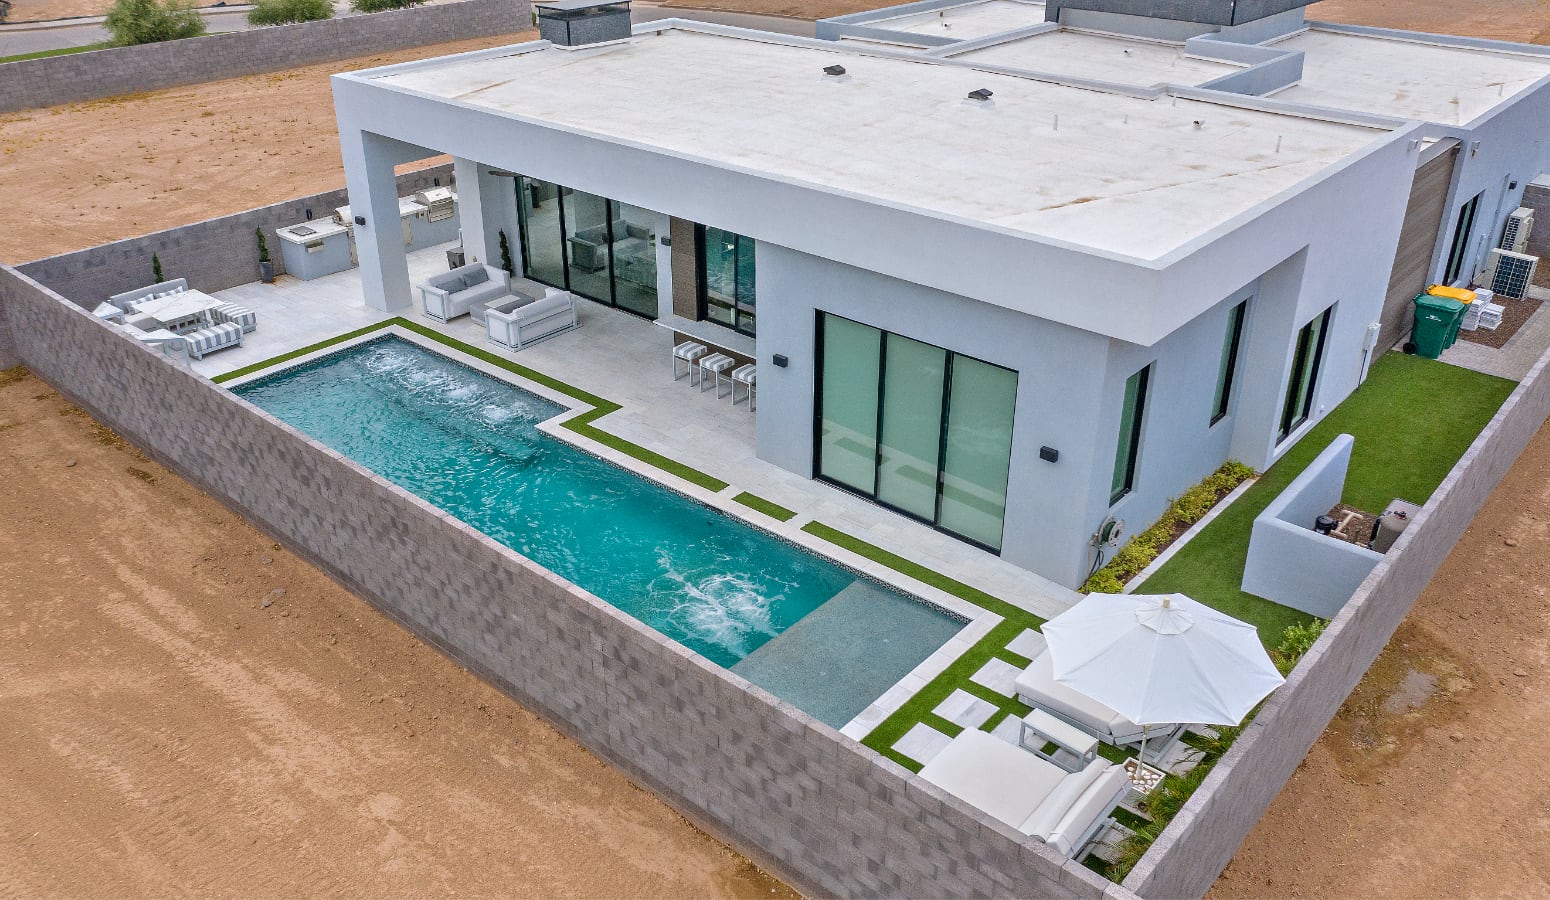 Exquisite Modern Home with Beautiful New Custom Pool, AZ No Limit Pools & Spas Mesa (602)421-9379